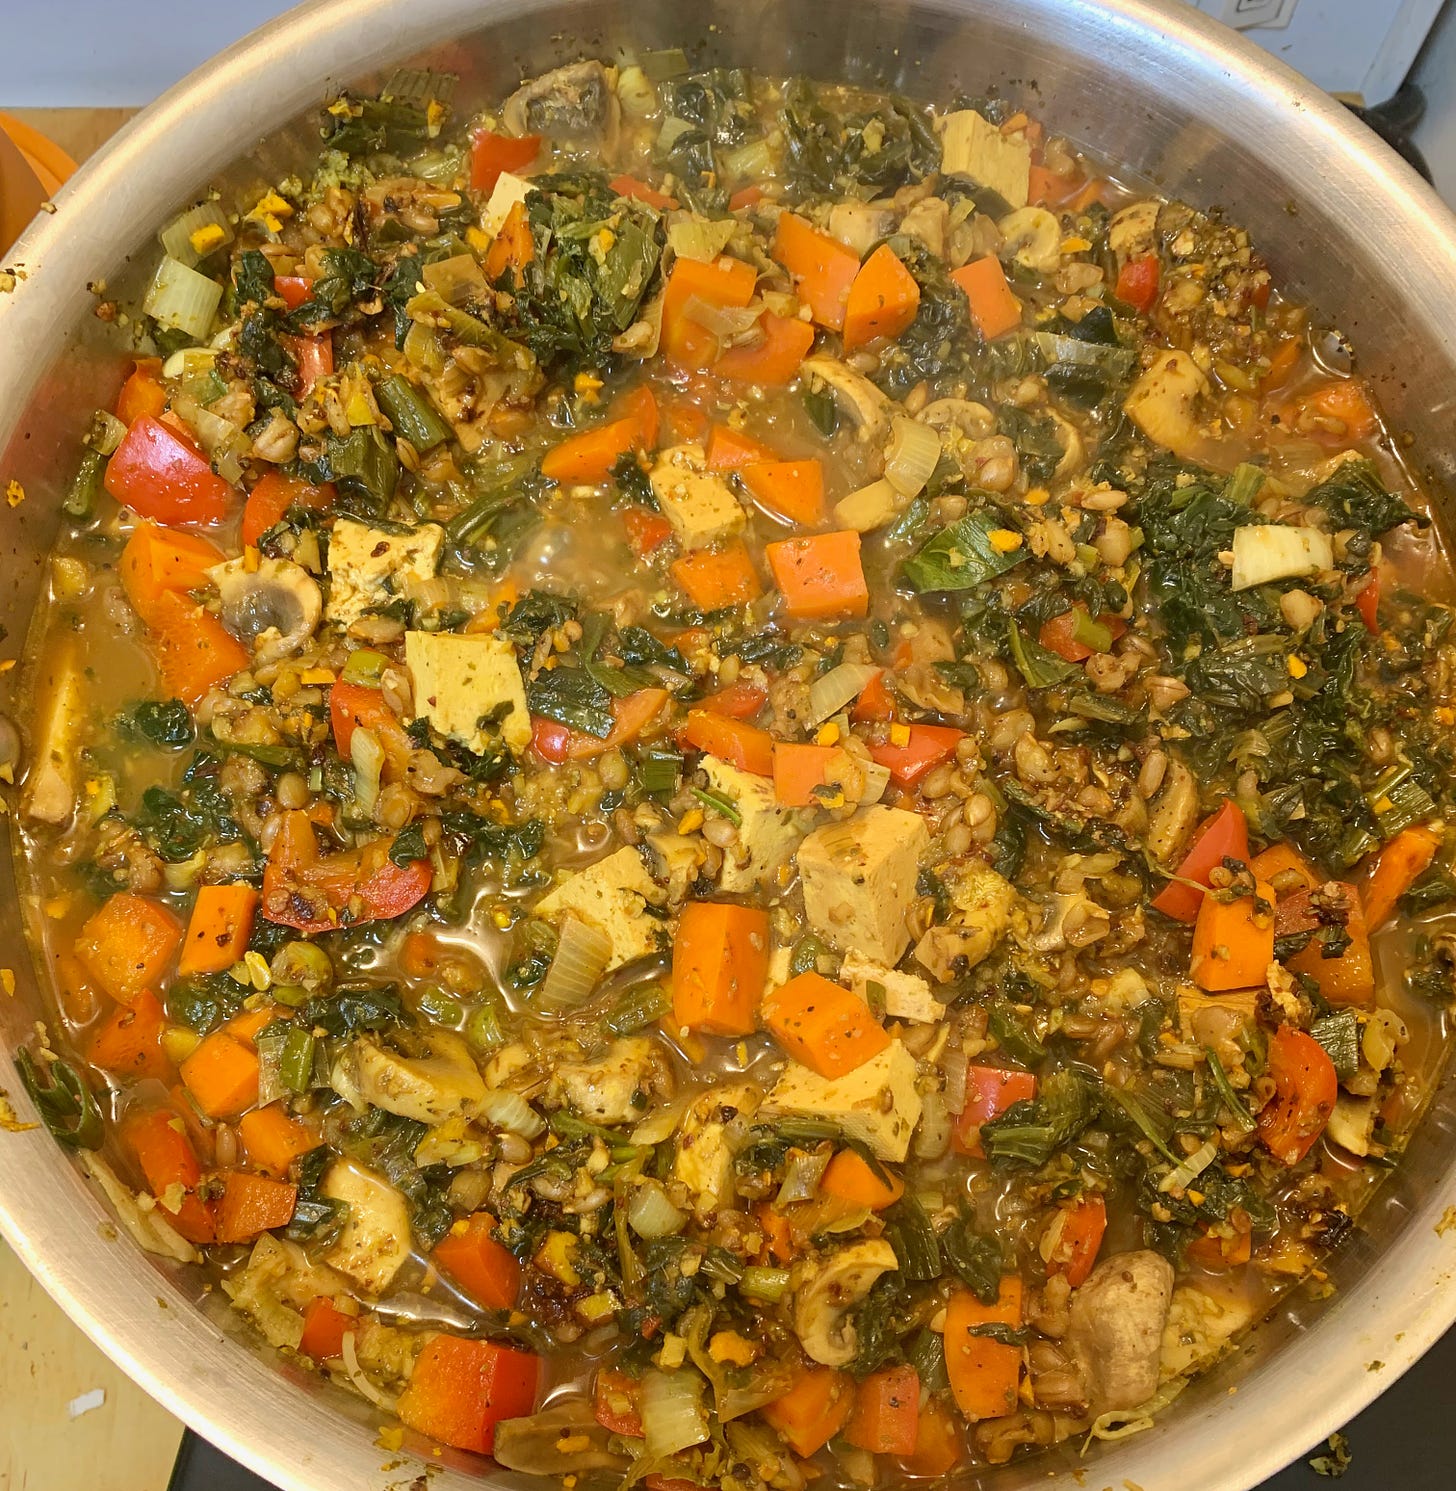 A pot of stew in which can be seen spinach, tofu, carrots, mushrooms, and red peppers.